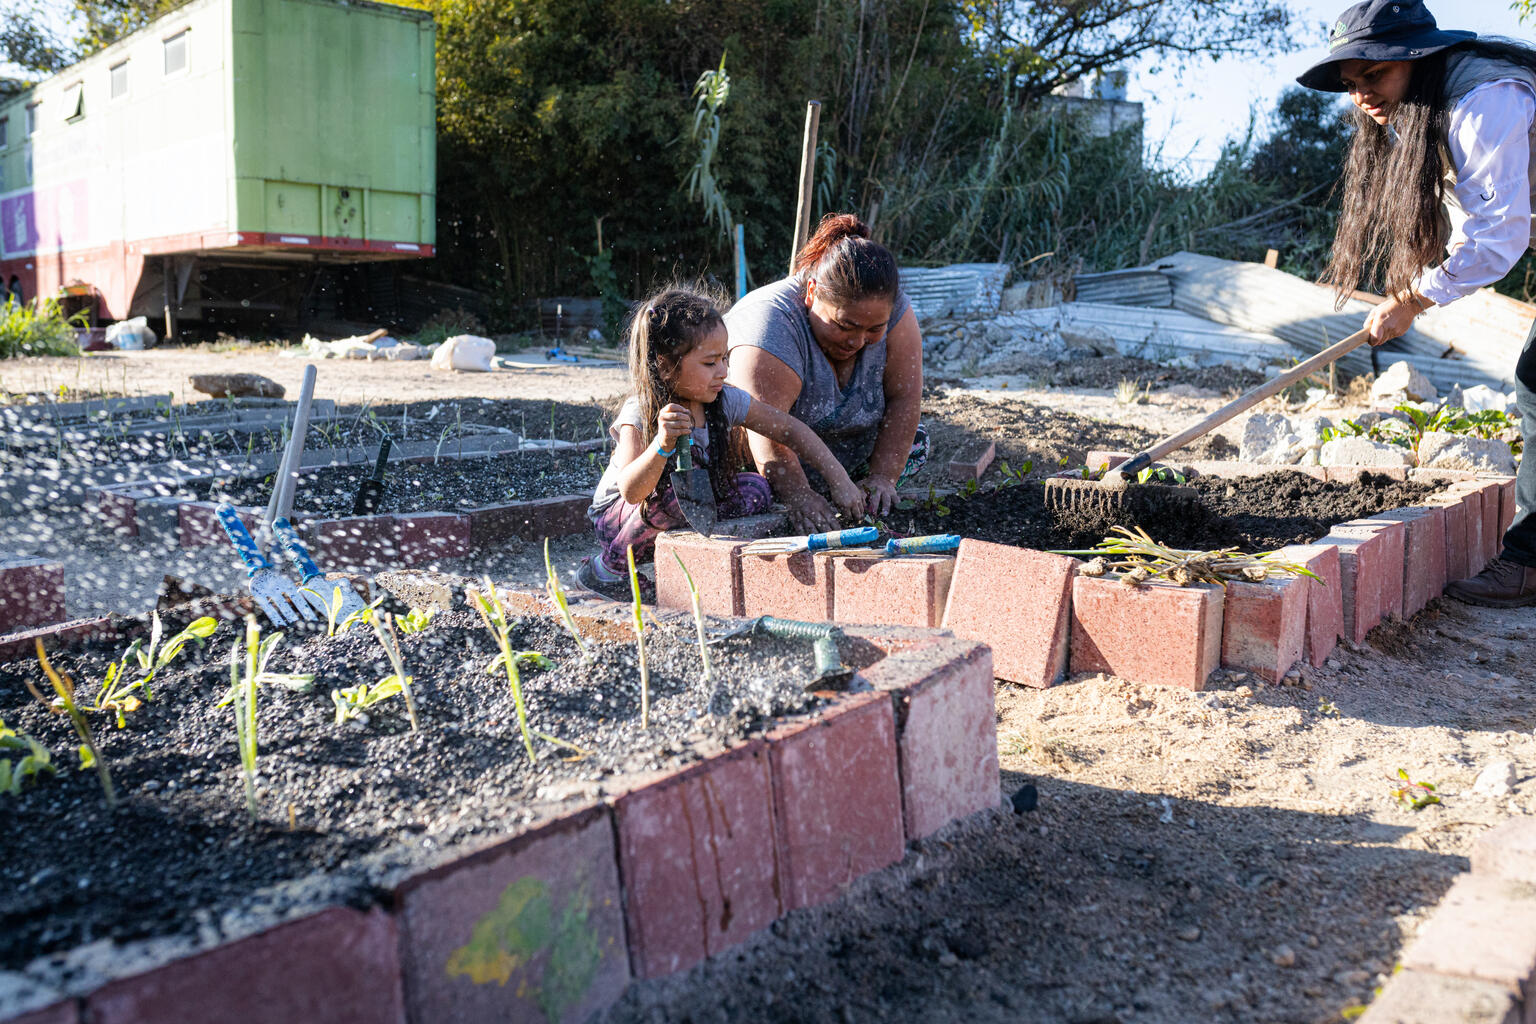 A mother and her daughter are planting lettuces in the community garden.